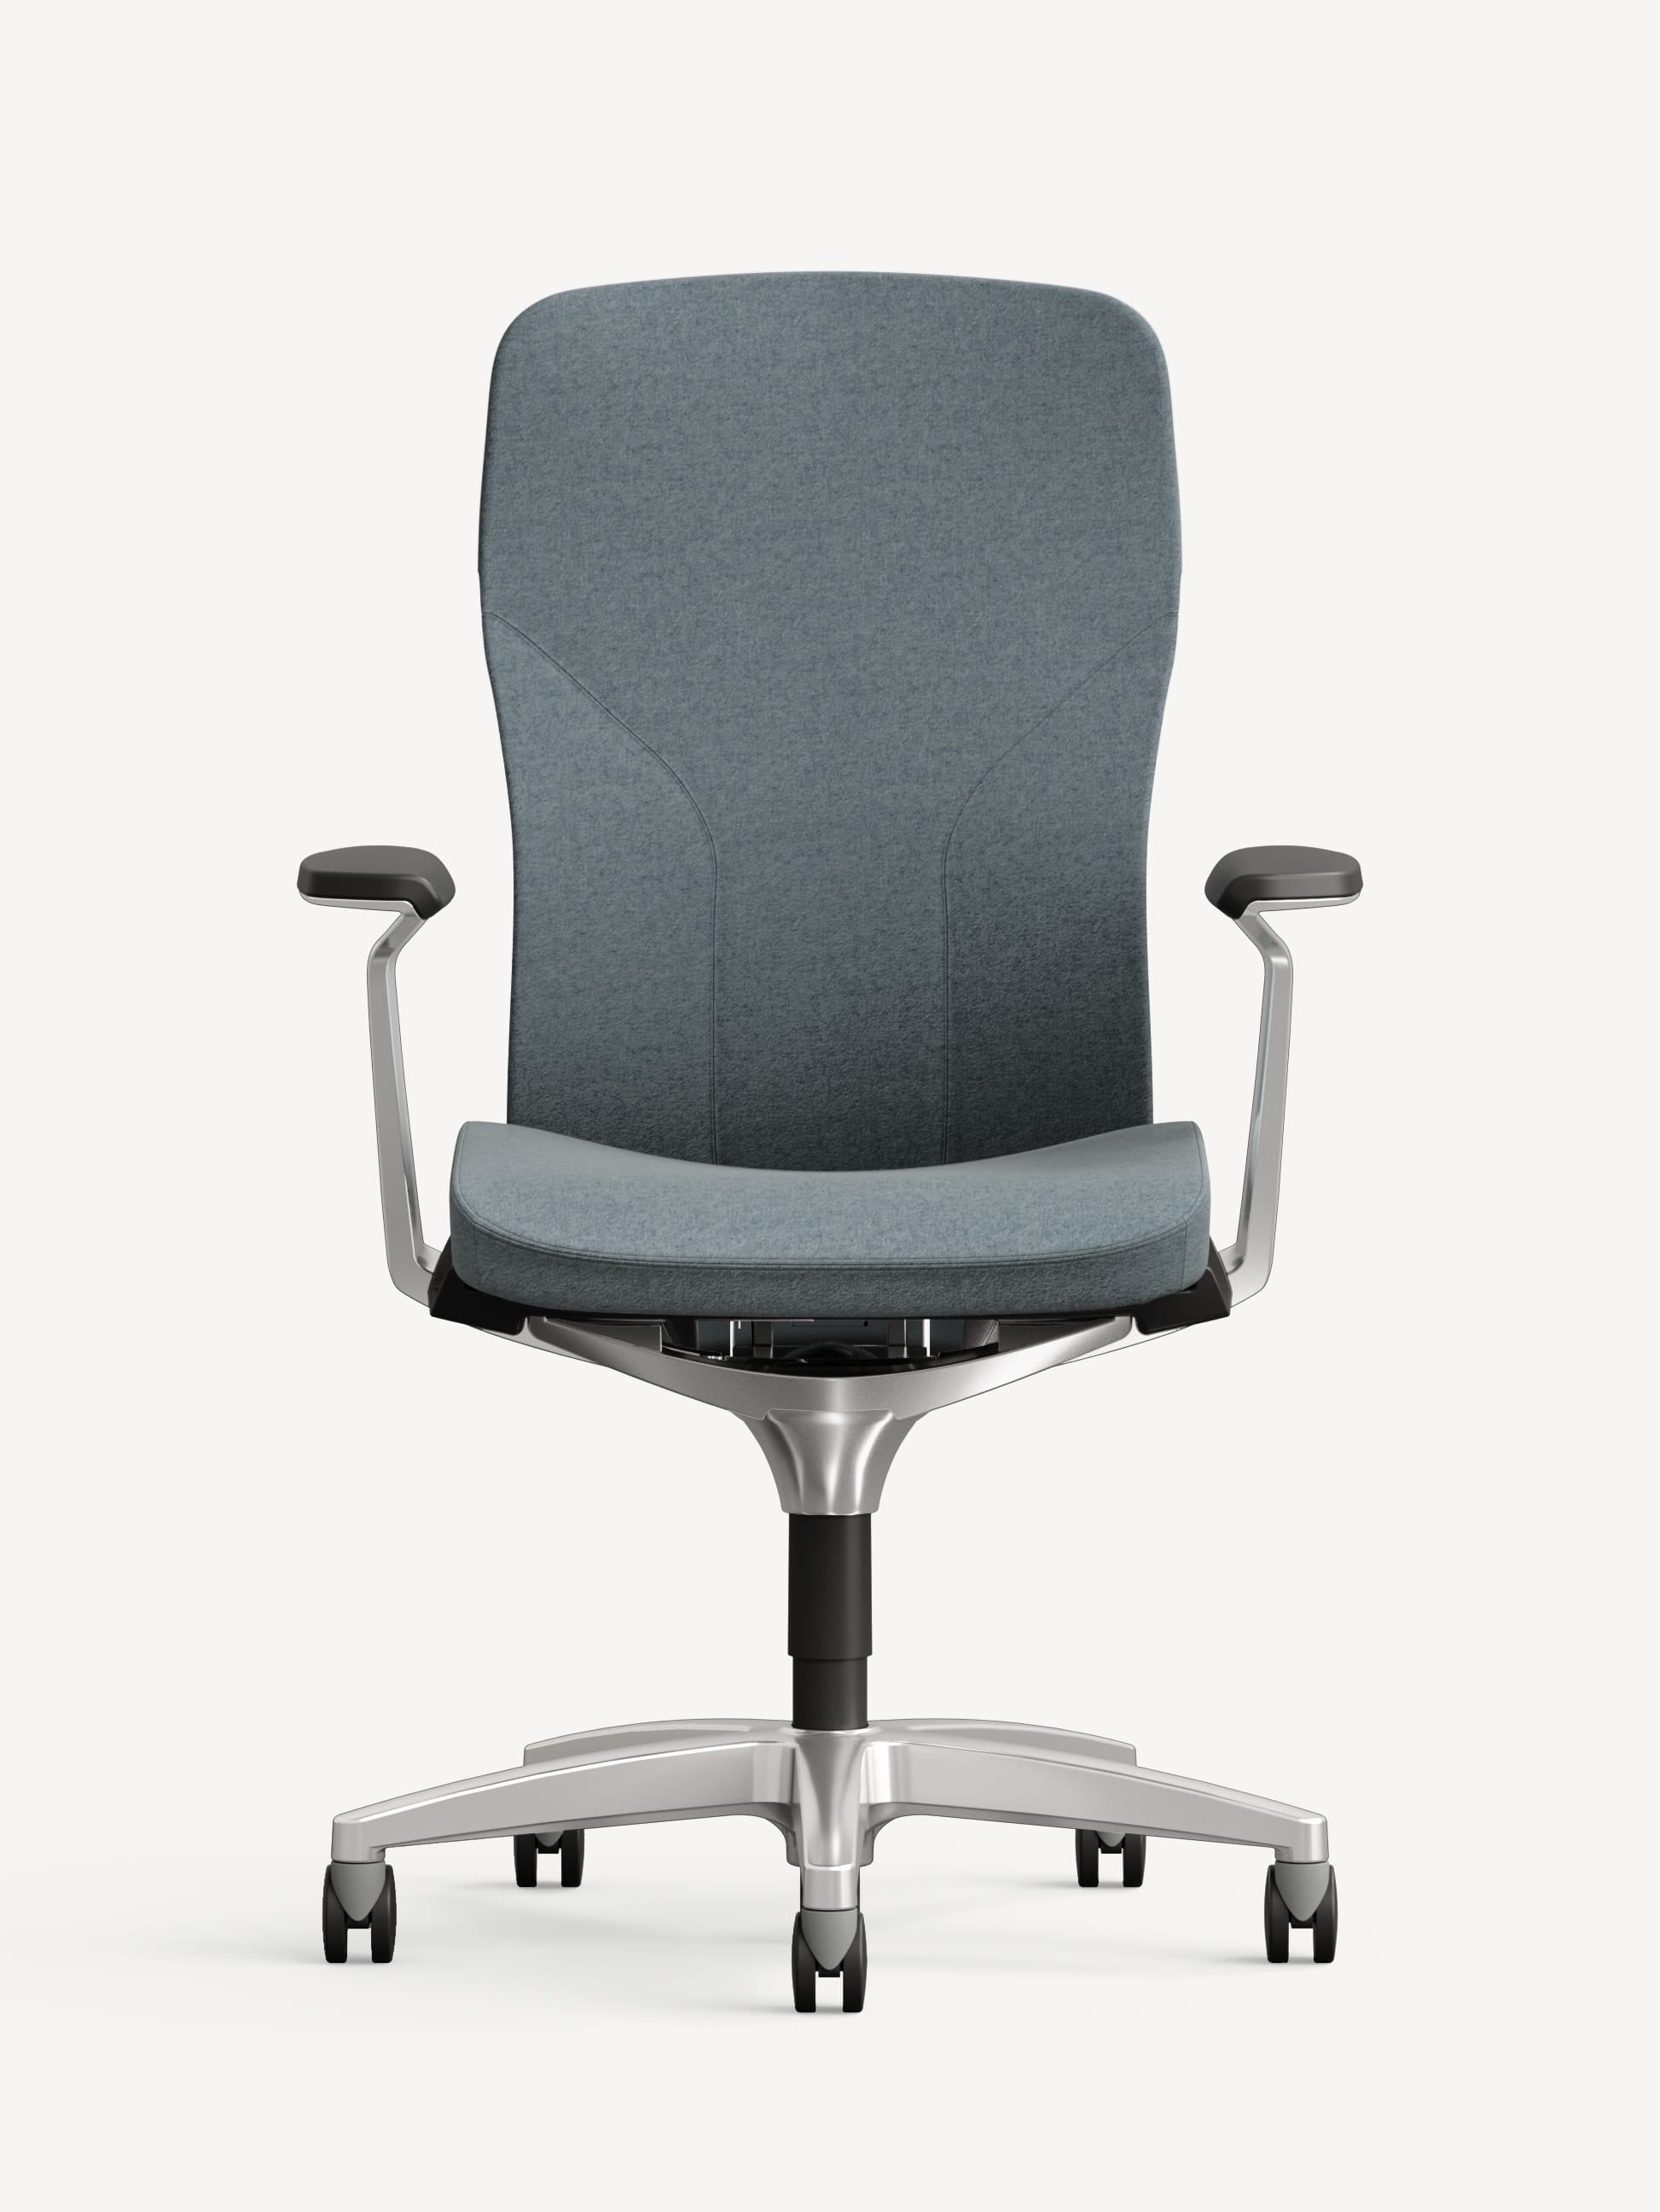 Front view of the Allsteel Acuity conference chair with light blue fabric and silver frame.